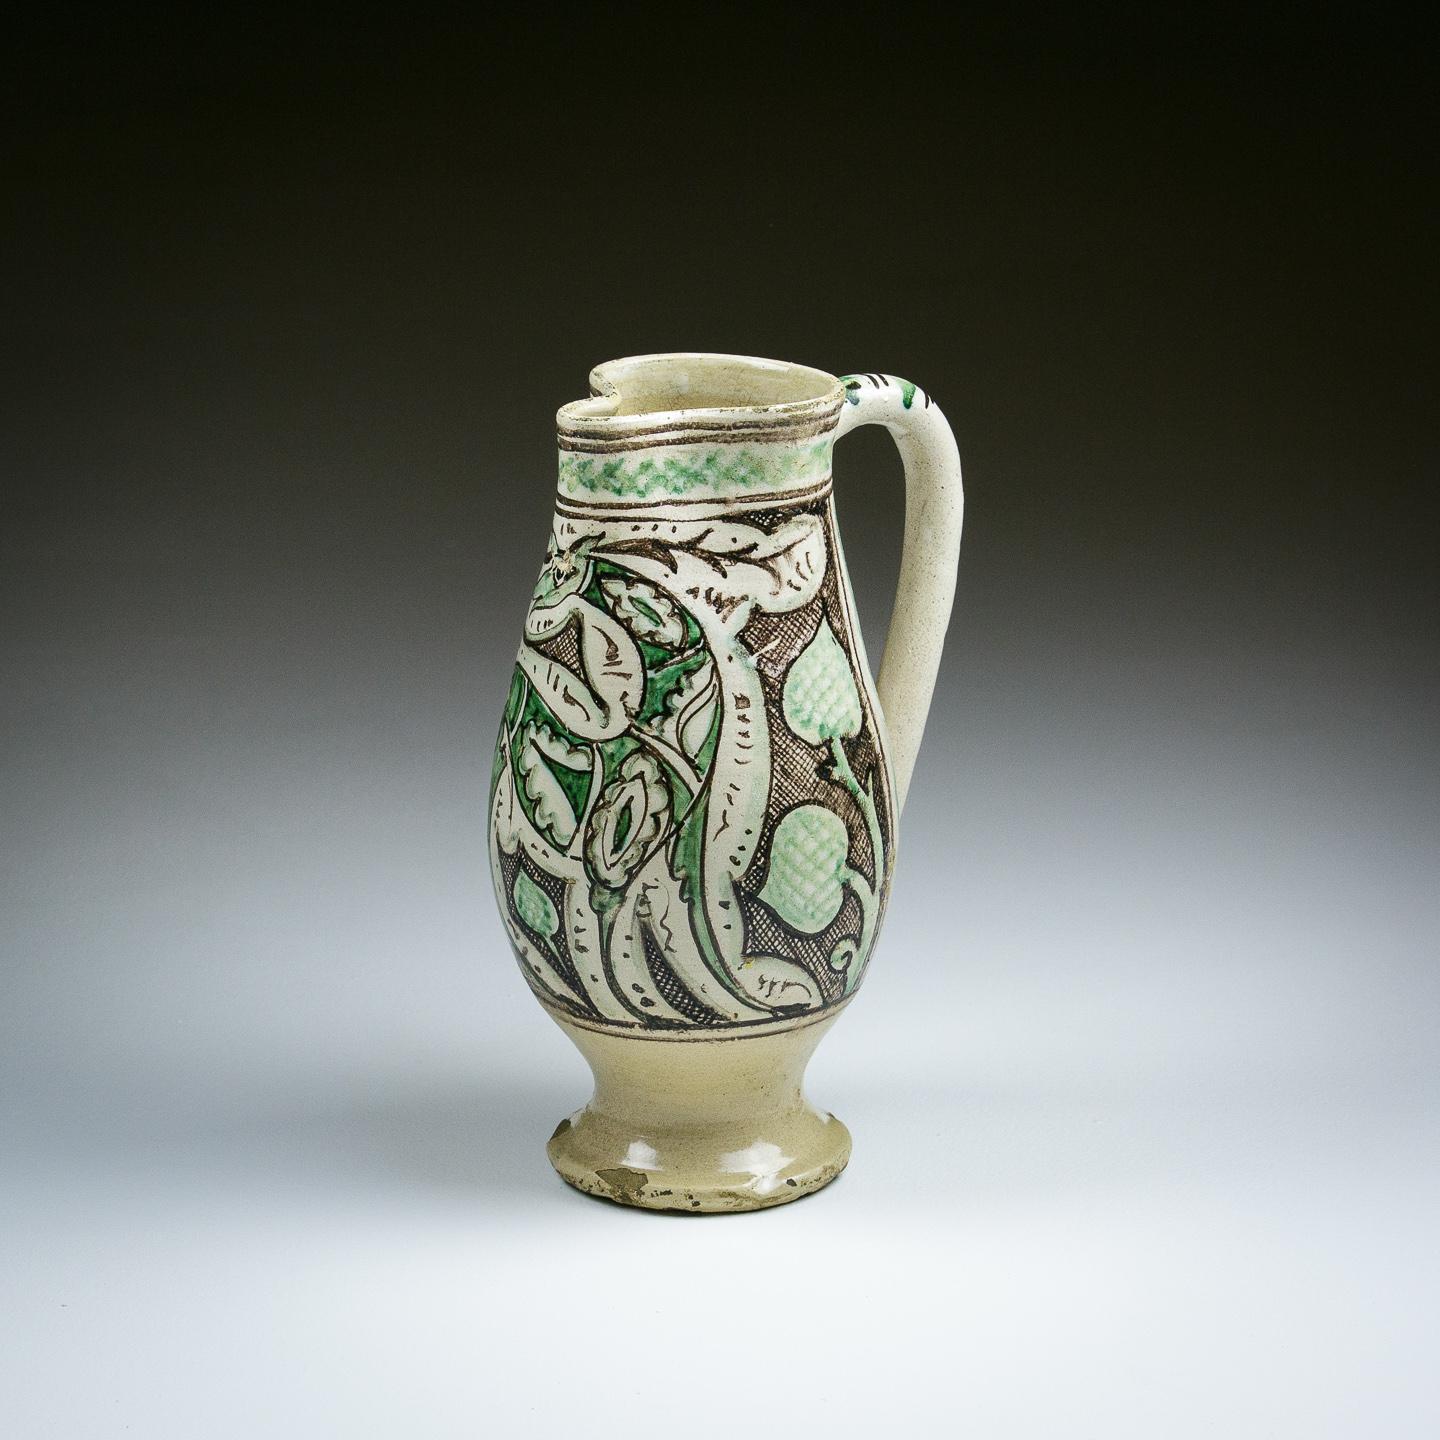 Tin Glazed Earthenware with vivid green and manganese brown decoration on buff clay with a clear lead glaze. Orvieto, Early 15th Century Circa 1420. Similar Example Found in The Louve Collection, Paris Inv, 7394